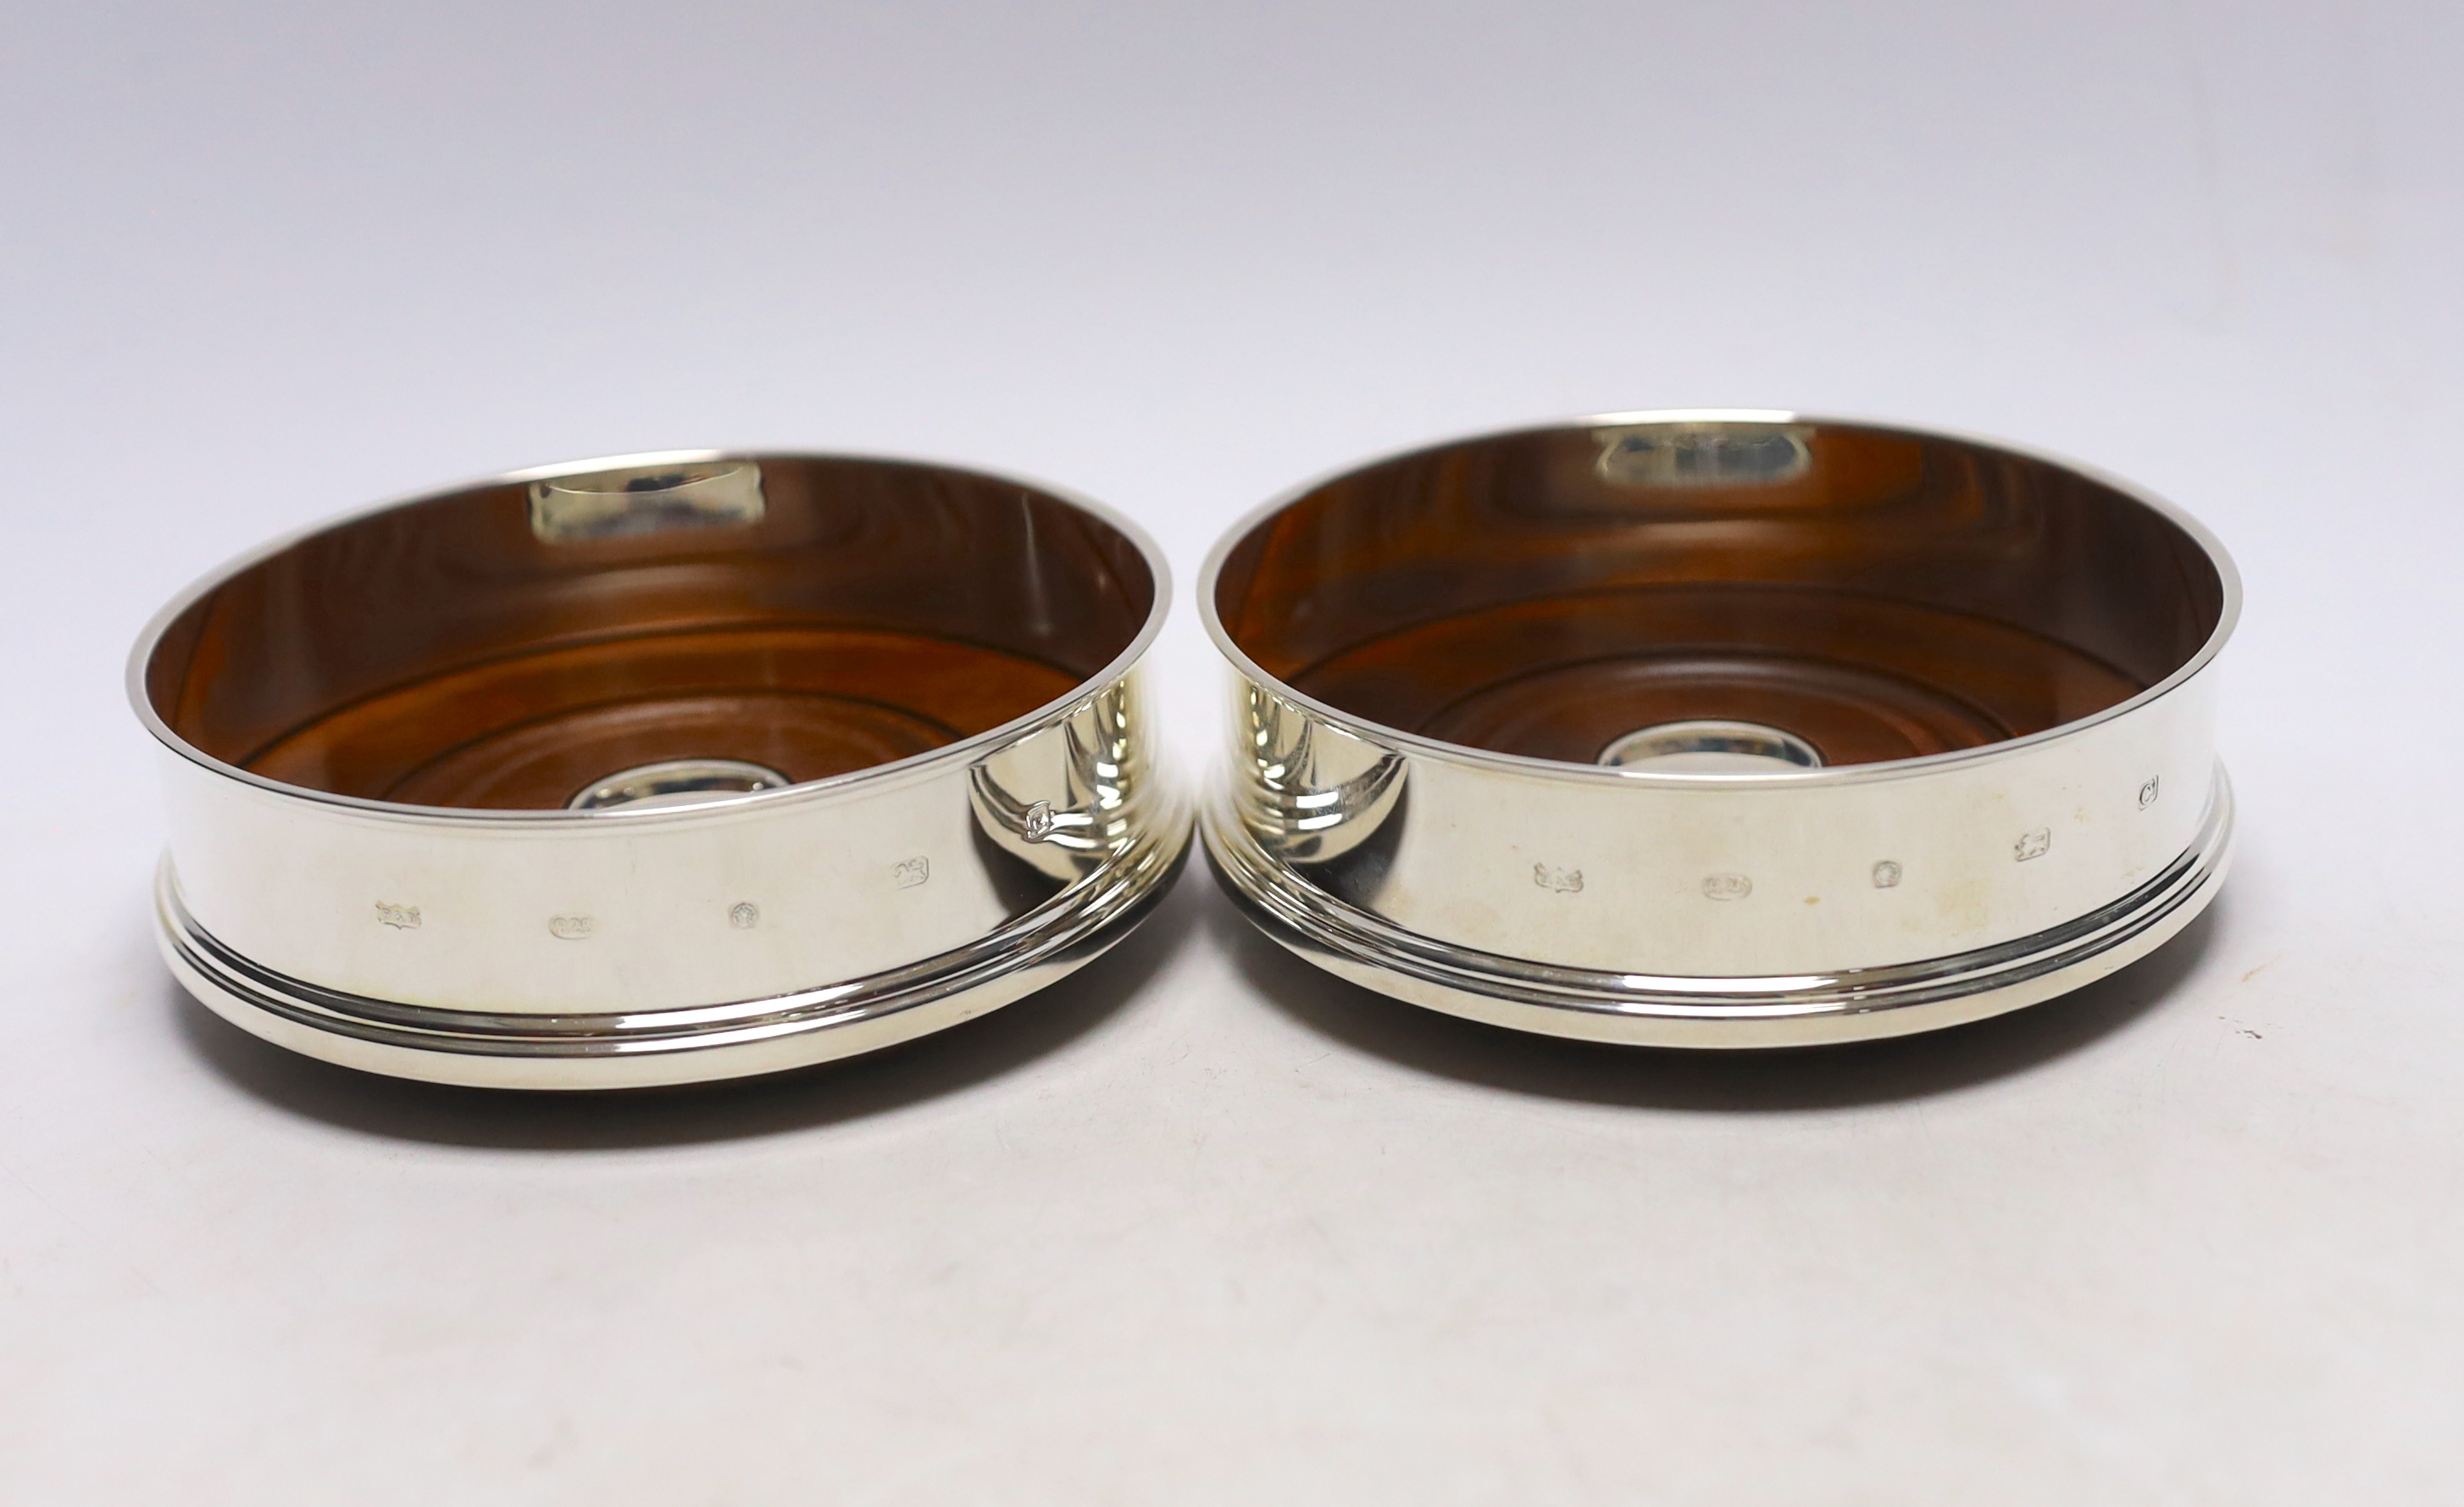 A pair of Elizabeth II silver mounted wine coasters, with turned wooden bases, Roberts & Dore, Sheffield, 2002, diameter 12.4cm, each individually boxed.                                                                   